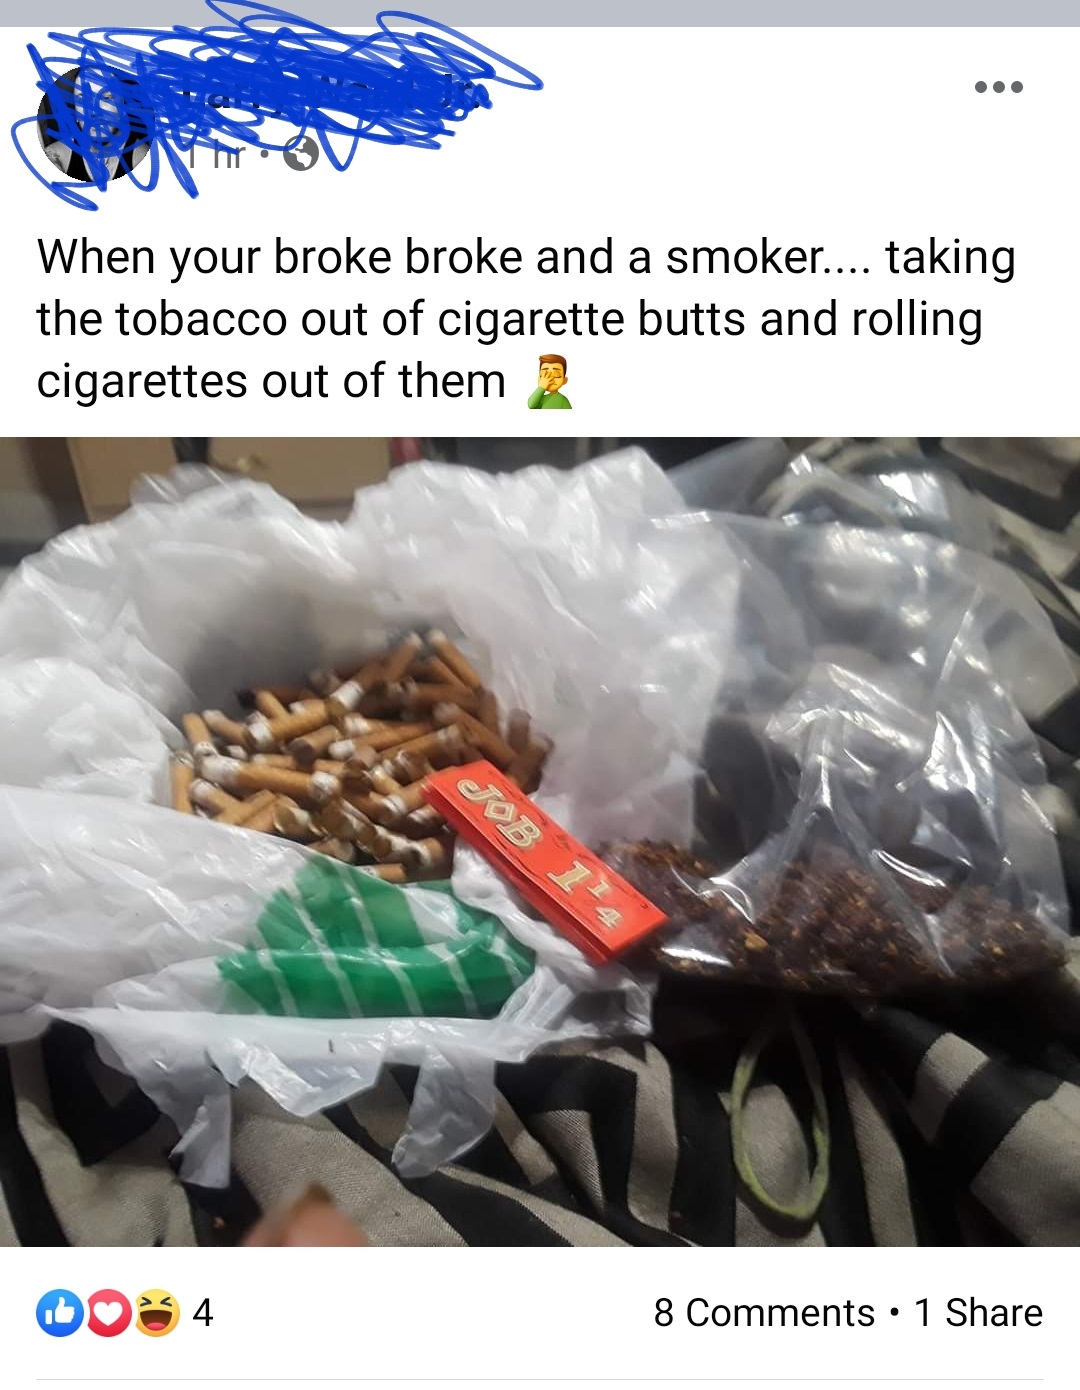 plastic - When your broke broke and a smoker.... taking the tobacco out of cigarette butts and rolling cigarettes out of them 2 Job 114 0034 8 1